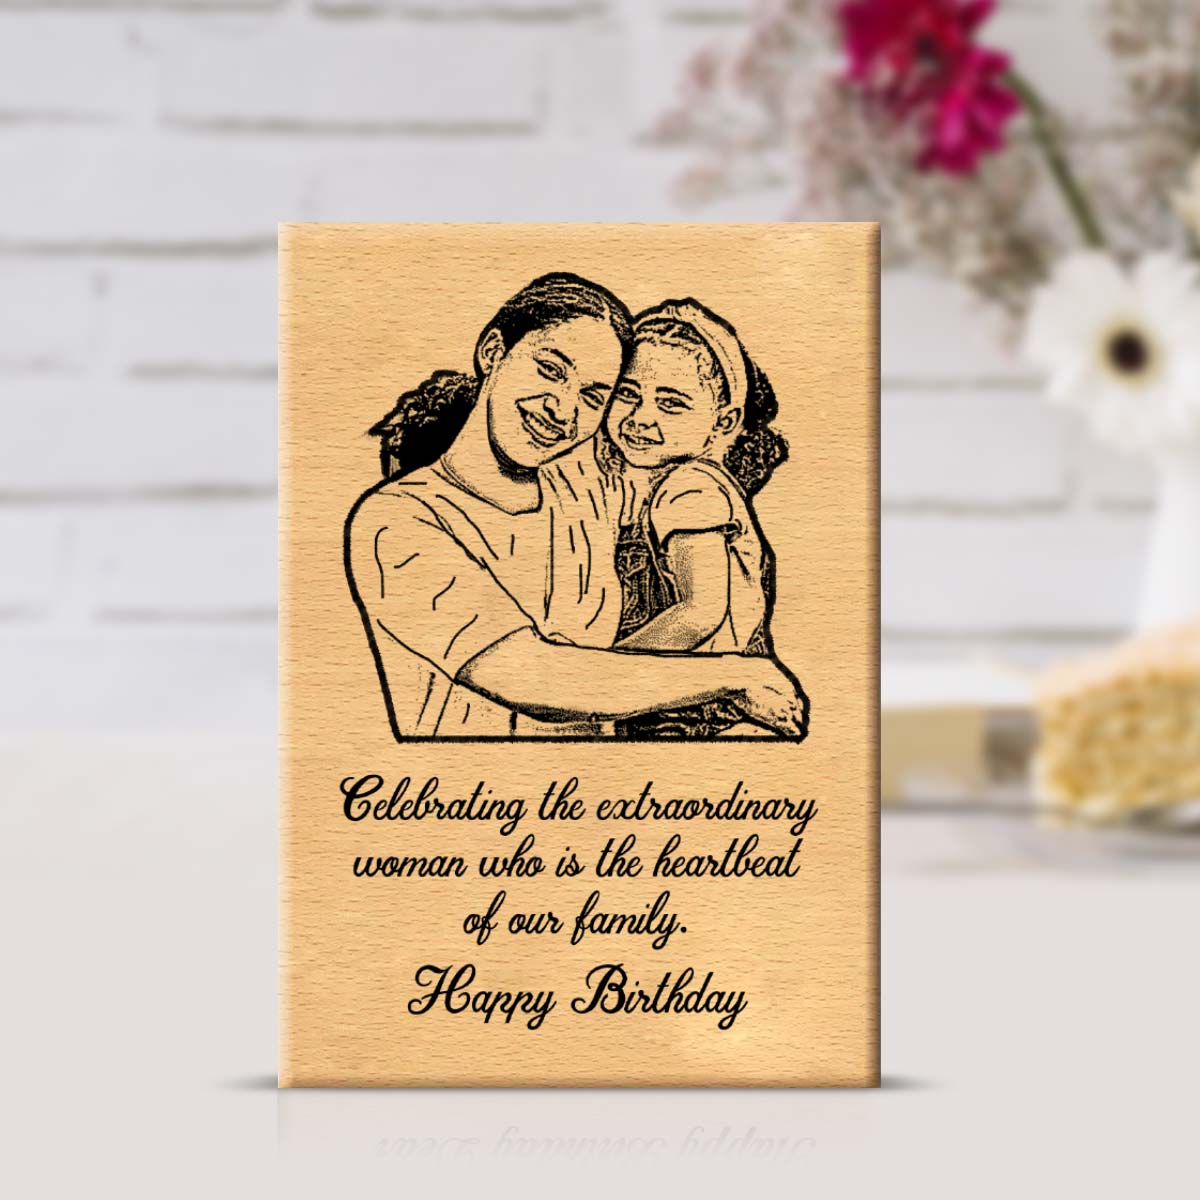 Personalised Celebrating the extra ordinary women Wooden Frame Plaque-1